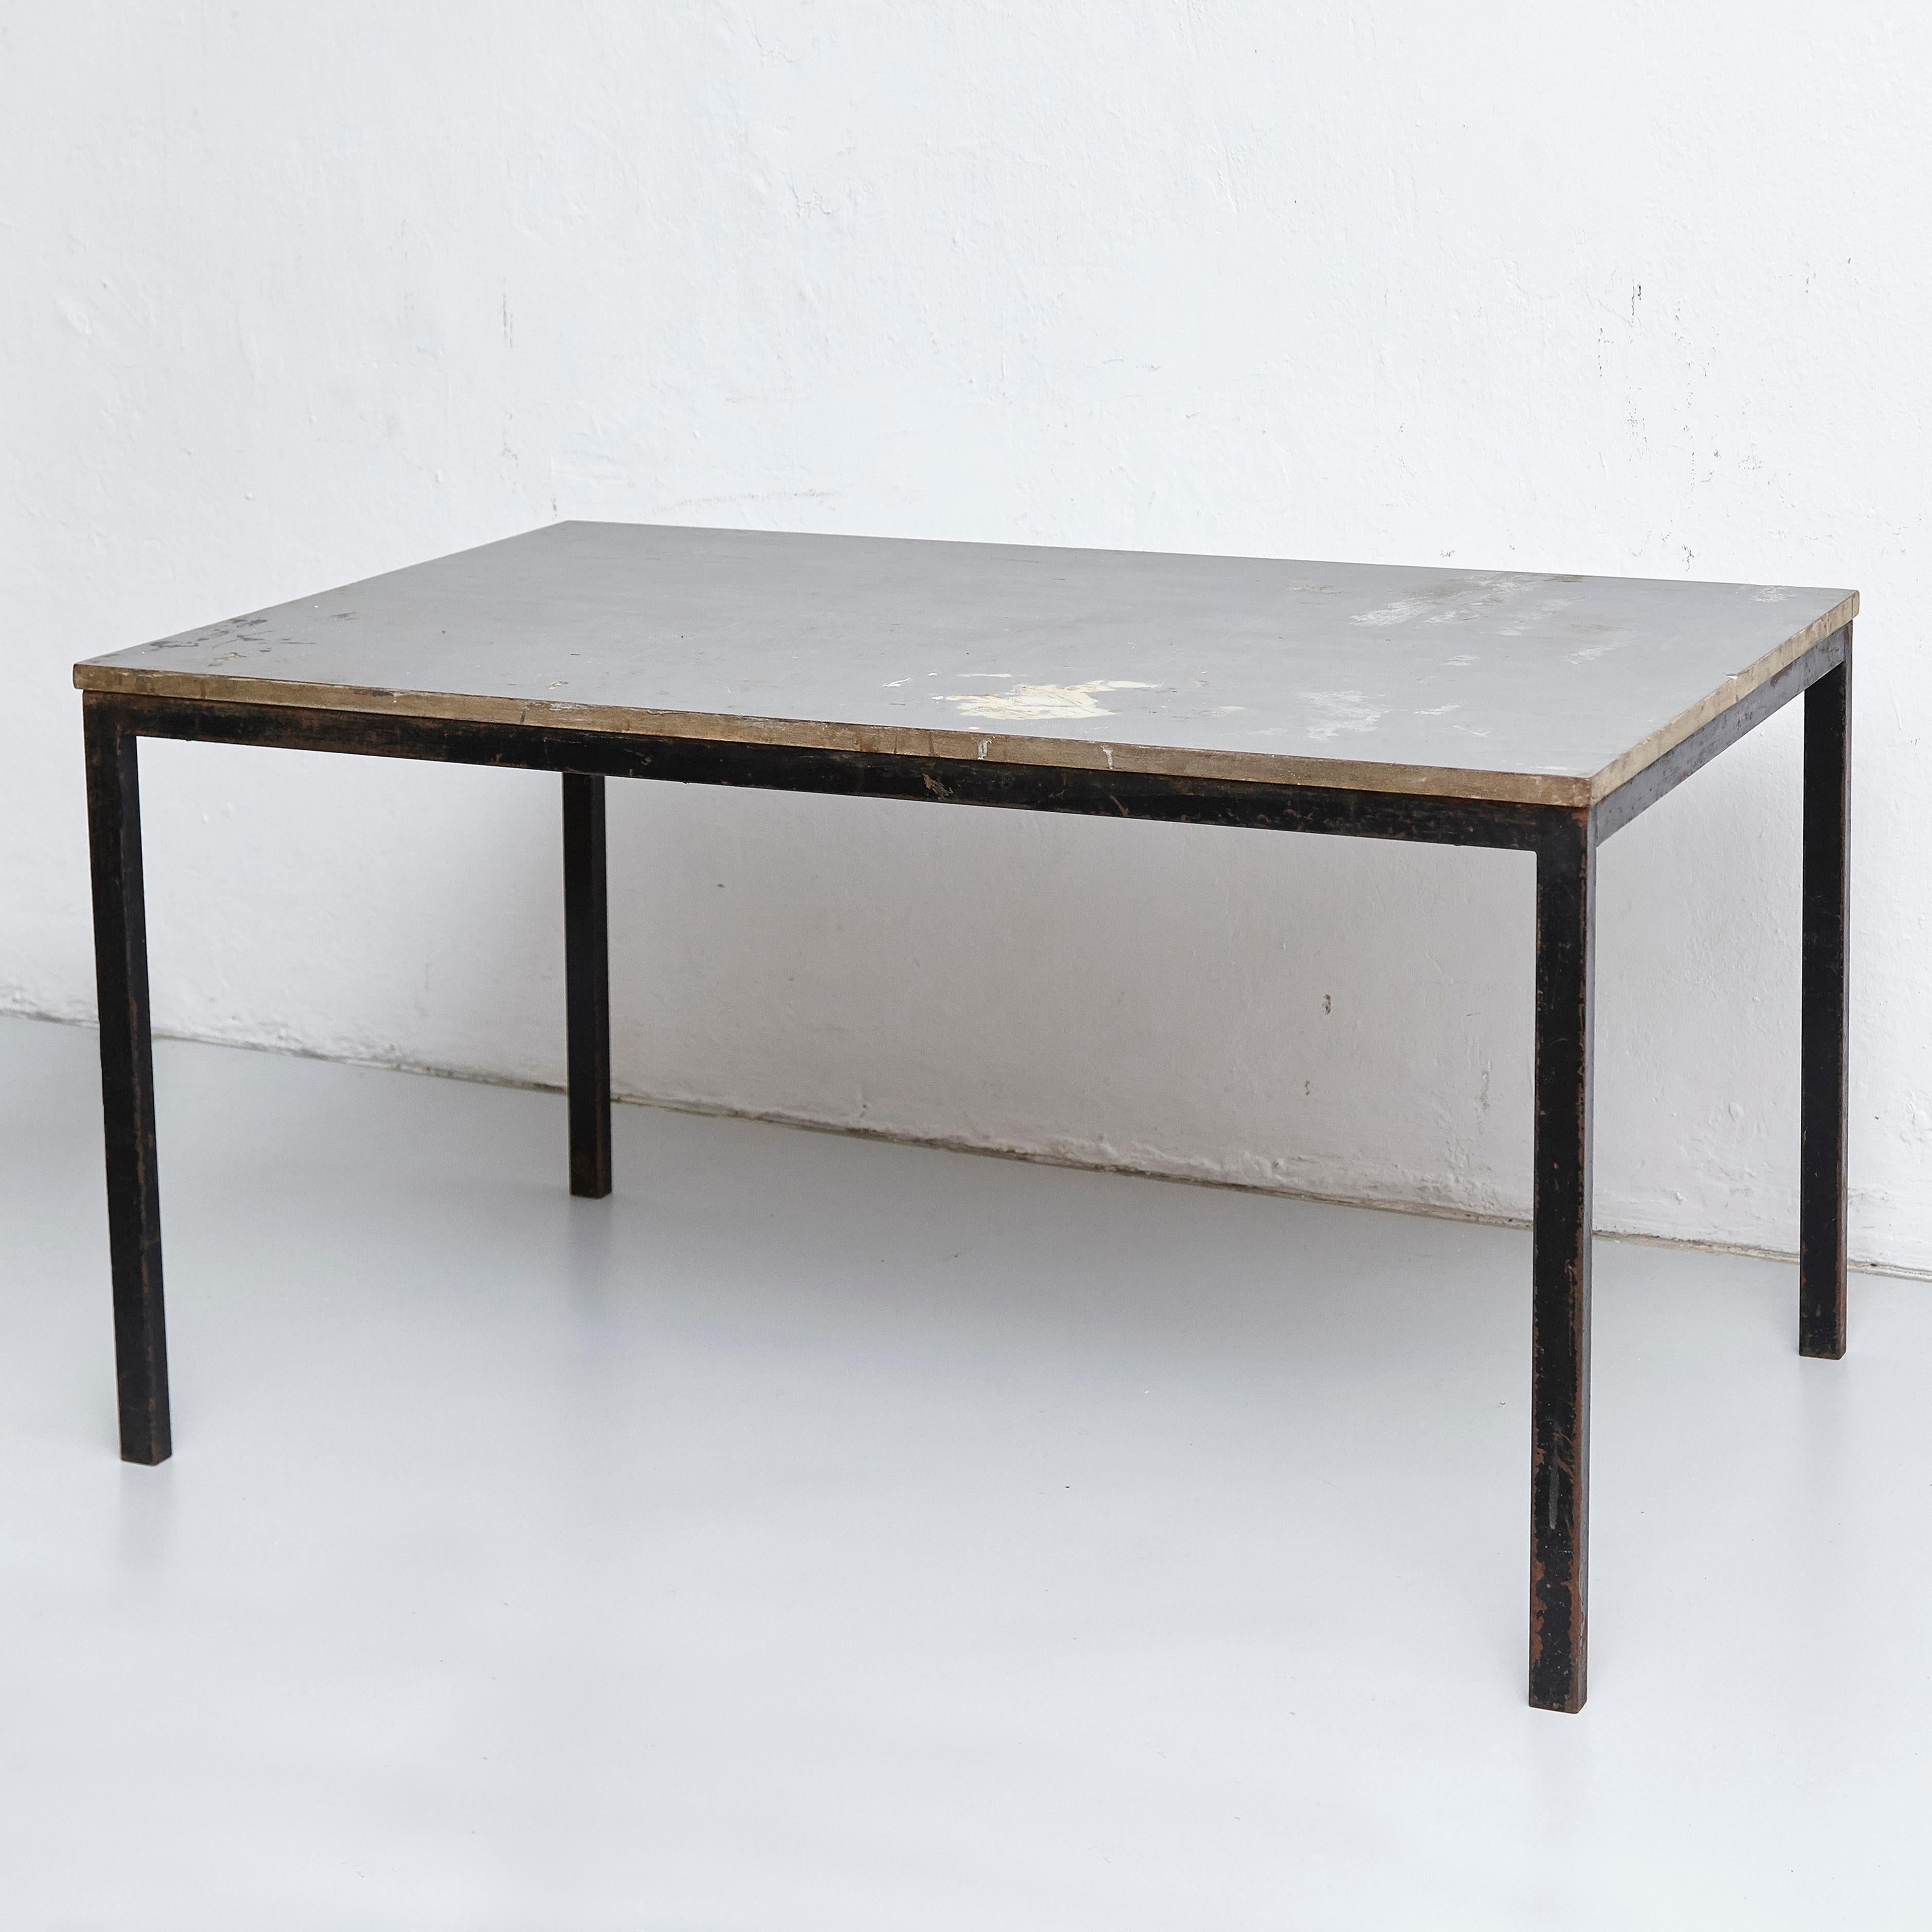 French Charlotte Perriand Cansado Table, circa 1950